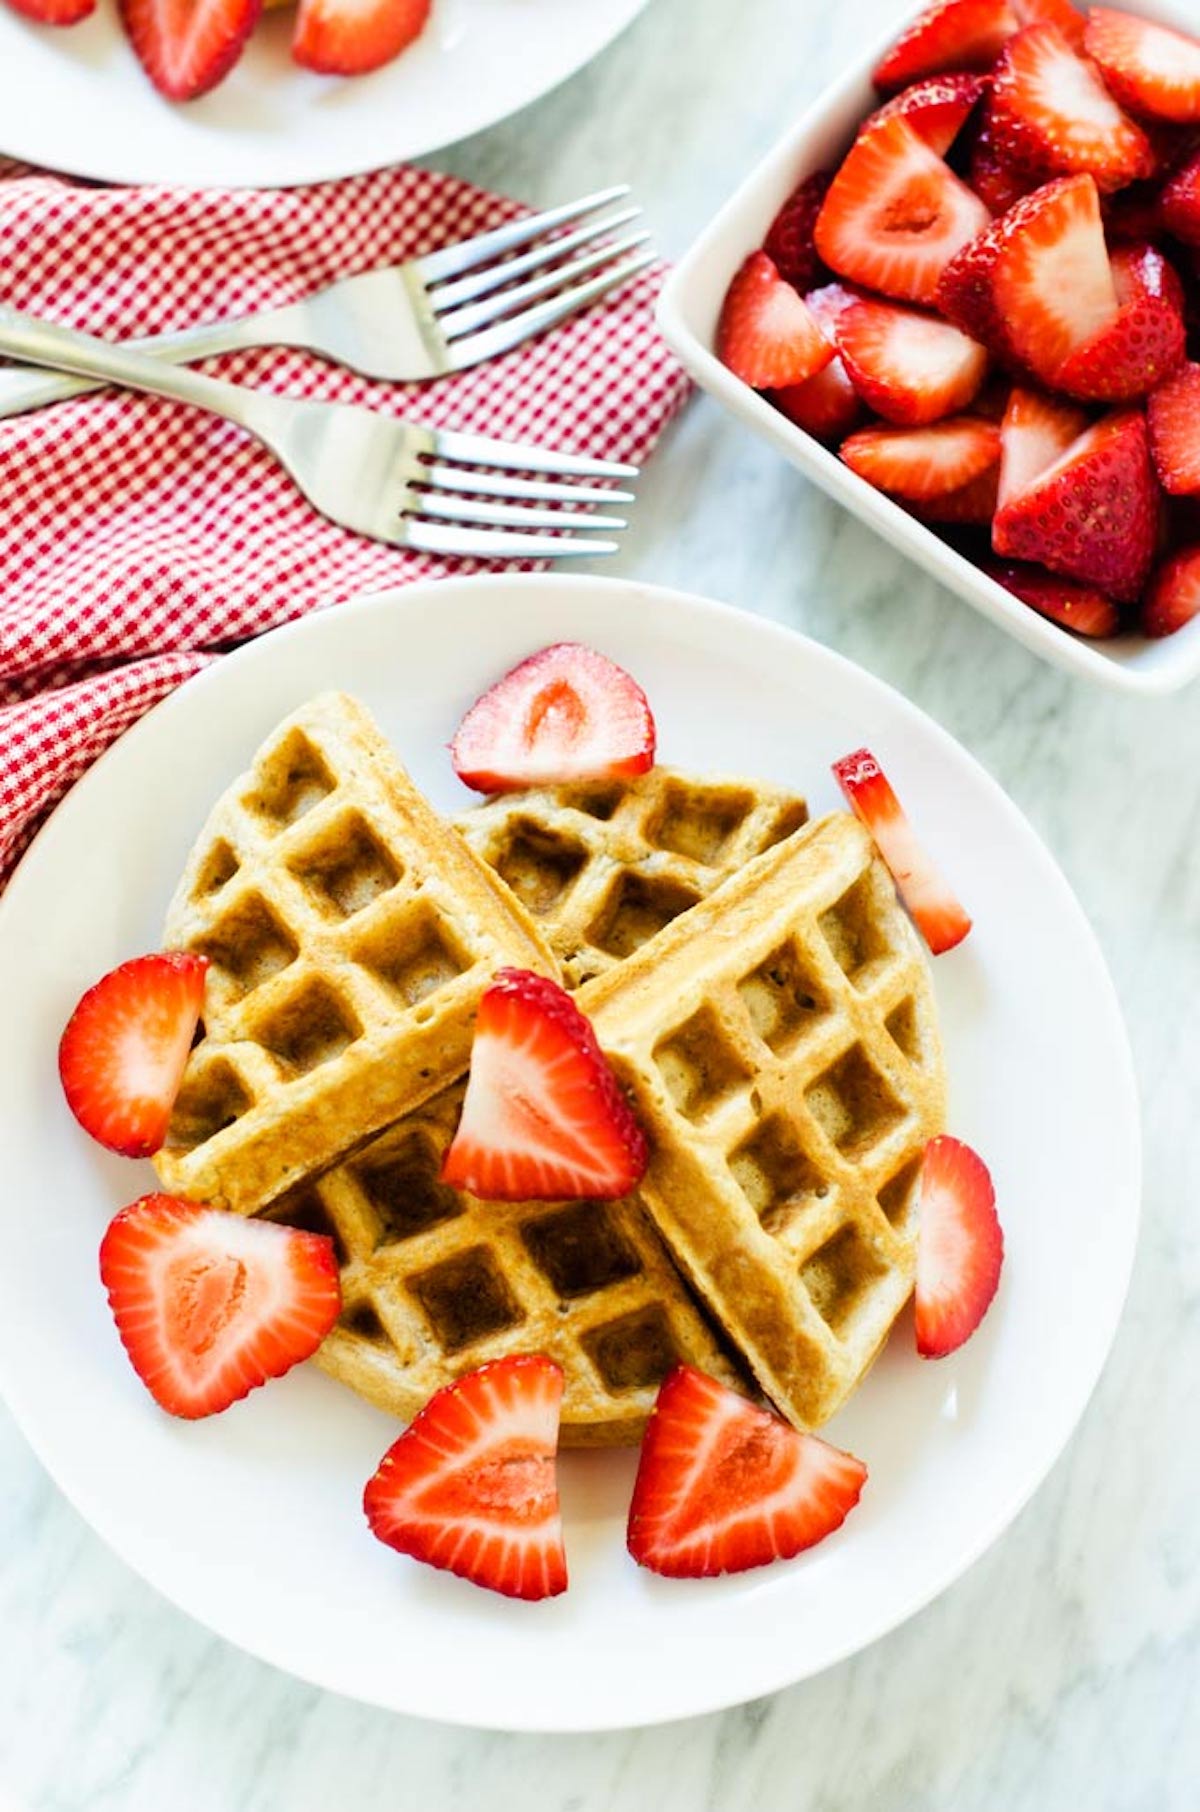 Photo of a white plate with oatmeal waffles topped with strawberries.